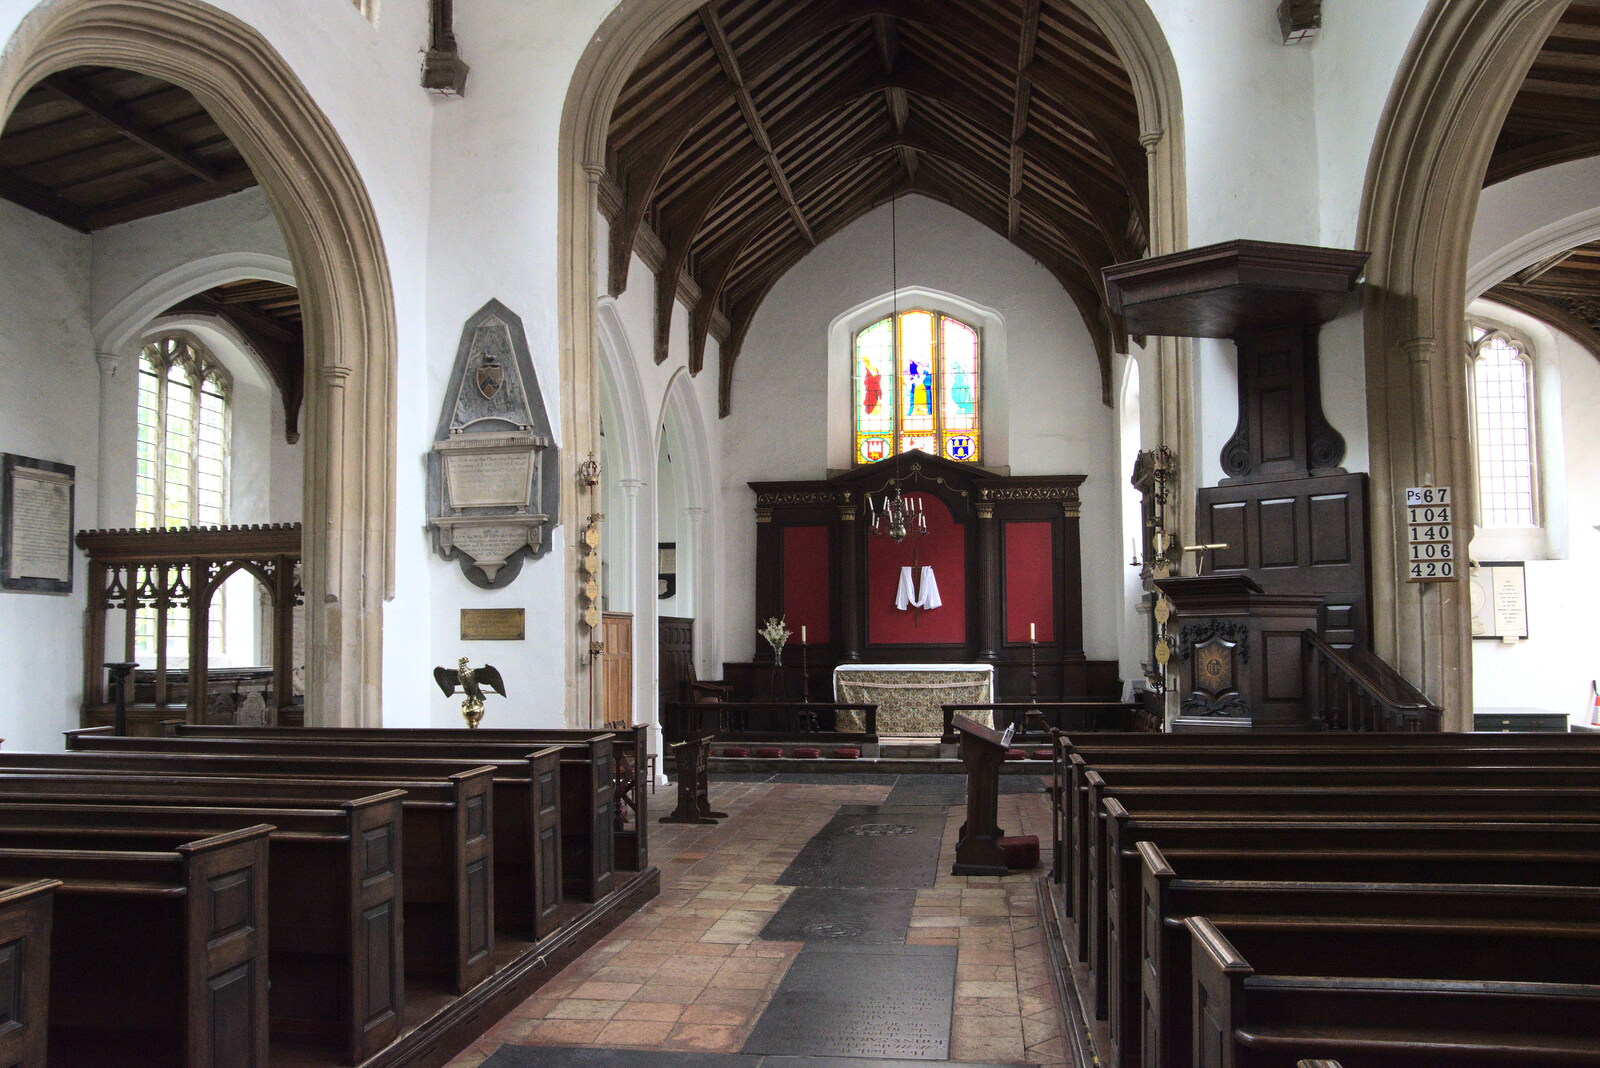 The inside of St. George's Church from Discovering the Hidden City: Norwich, Norfolk - 23rd May 2022